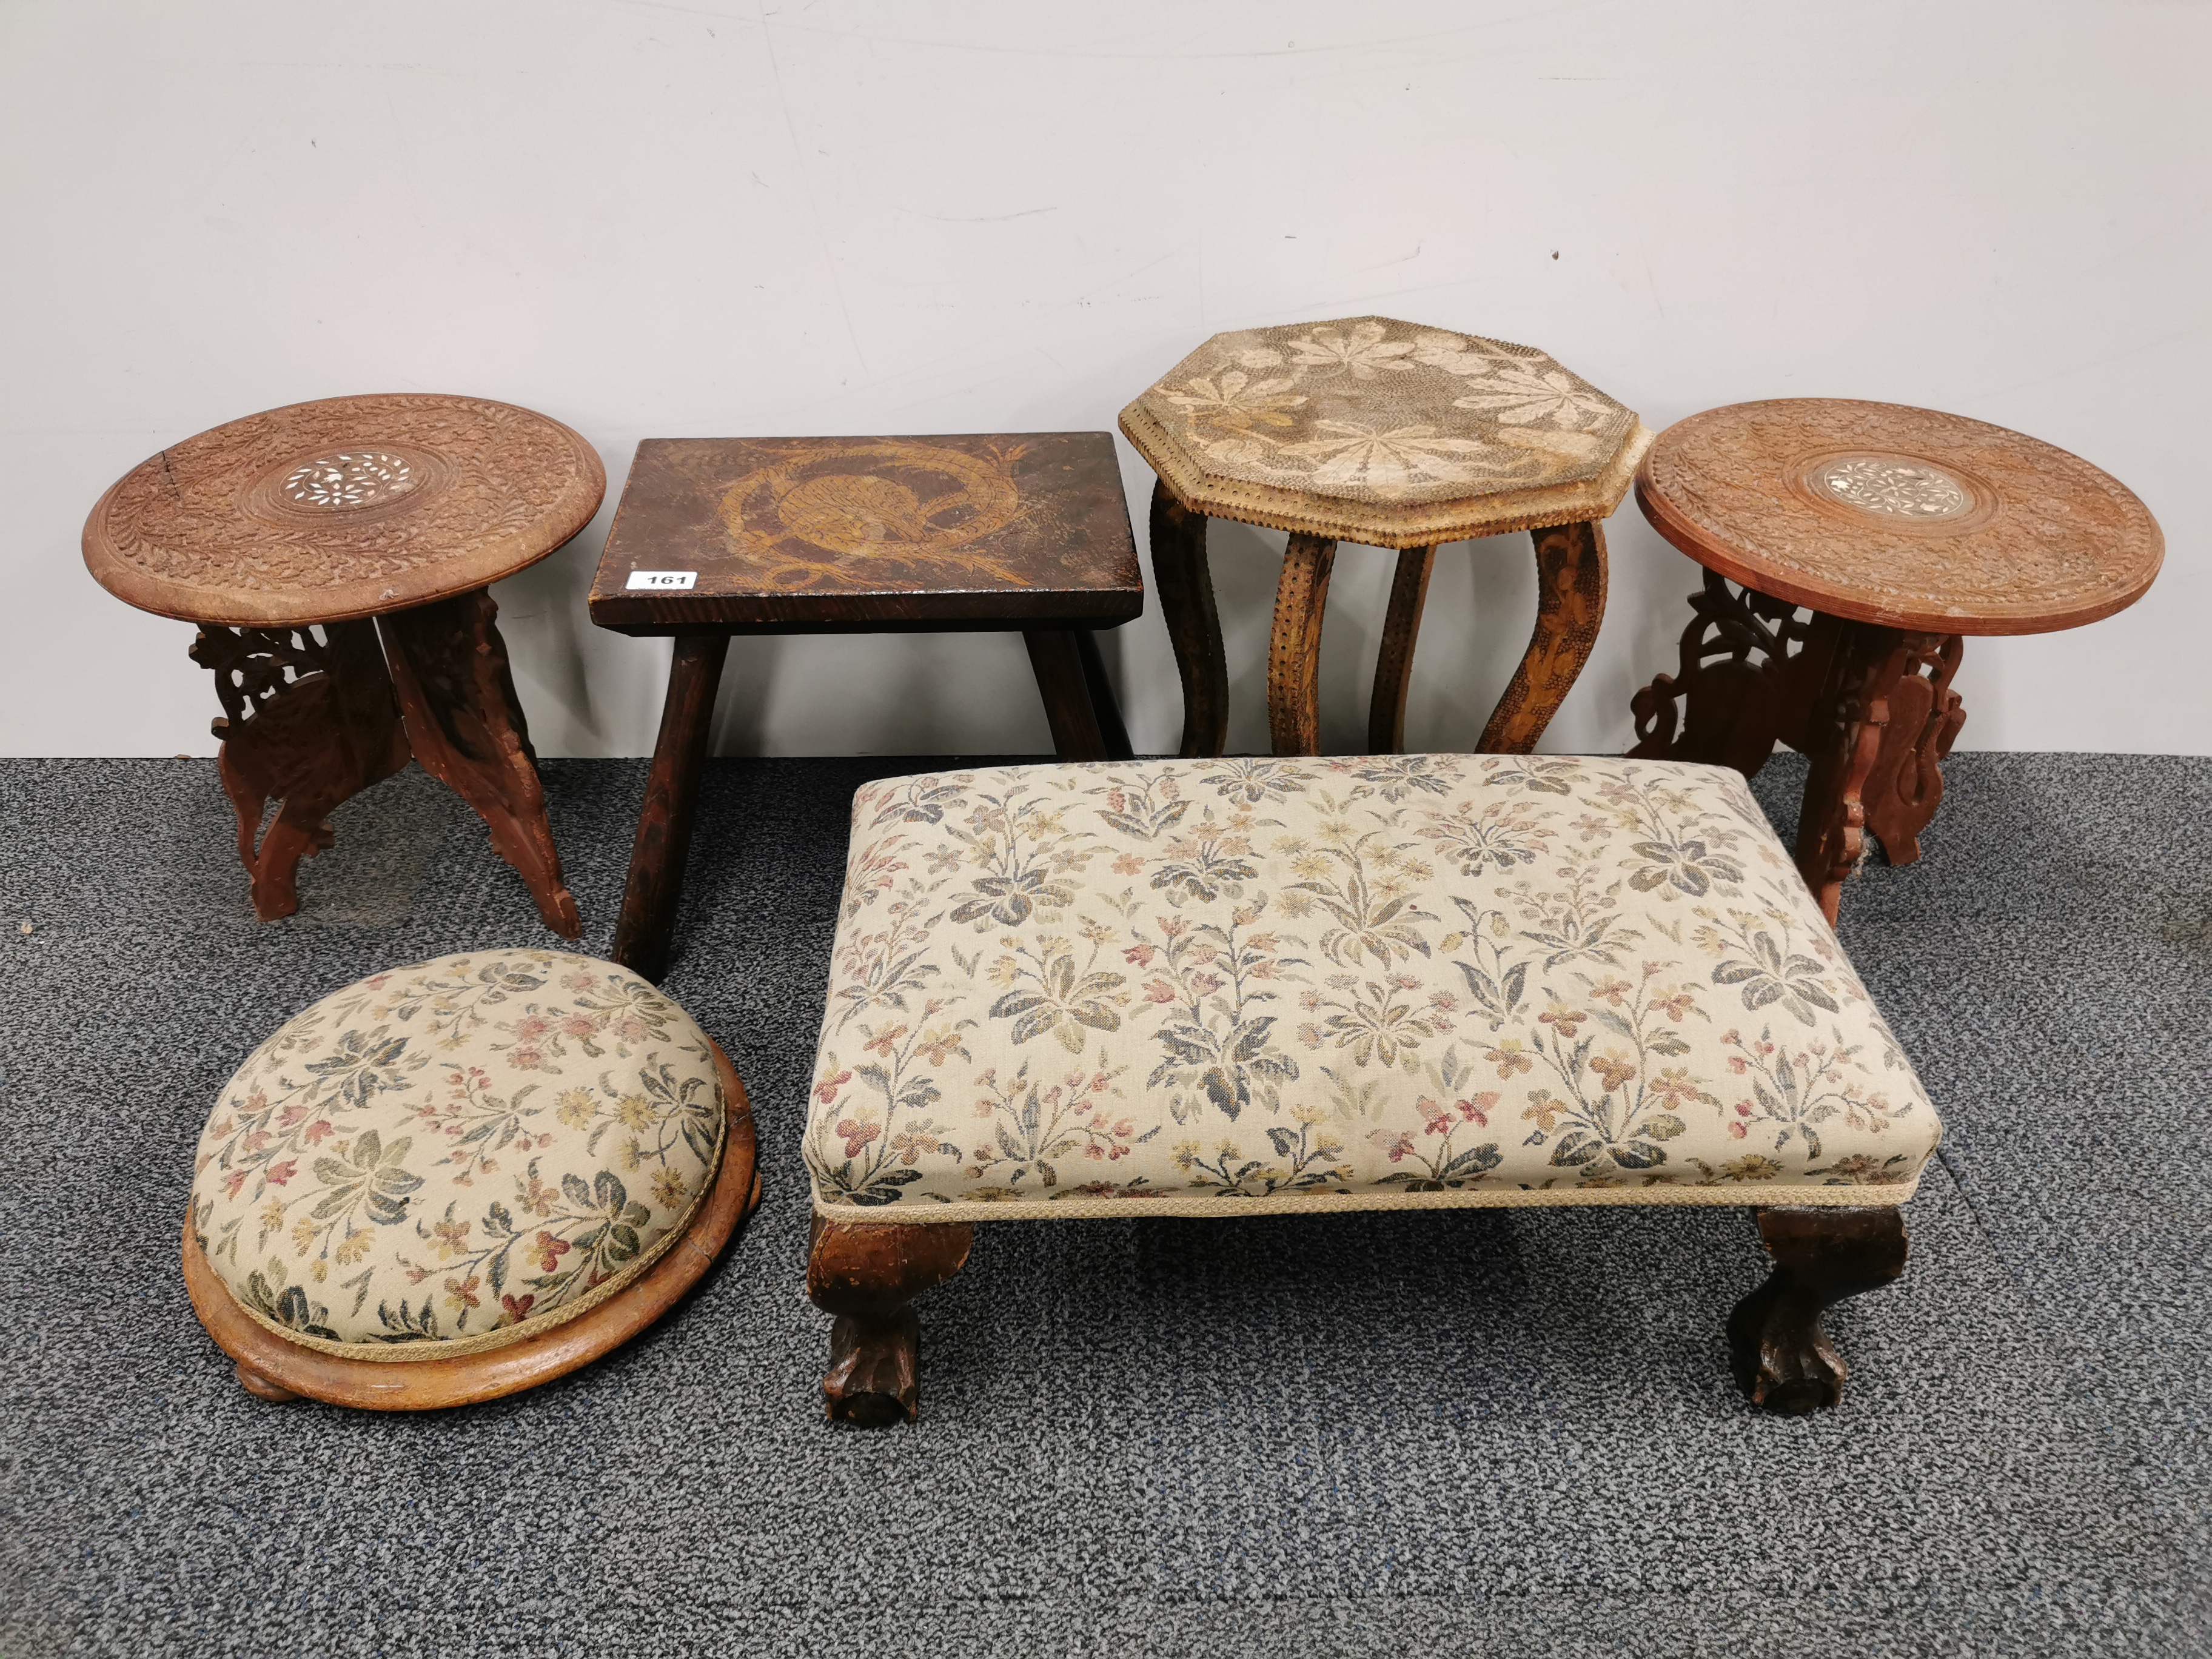 A group of small tables and footstools.